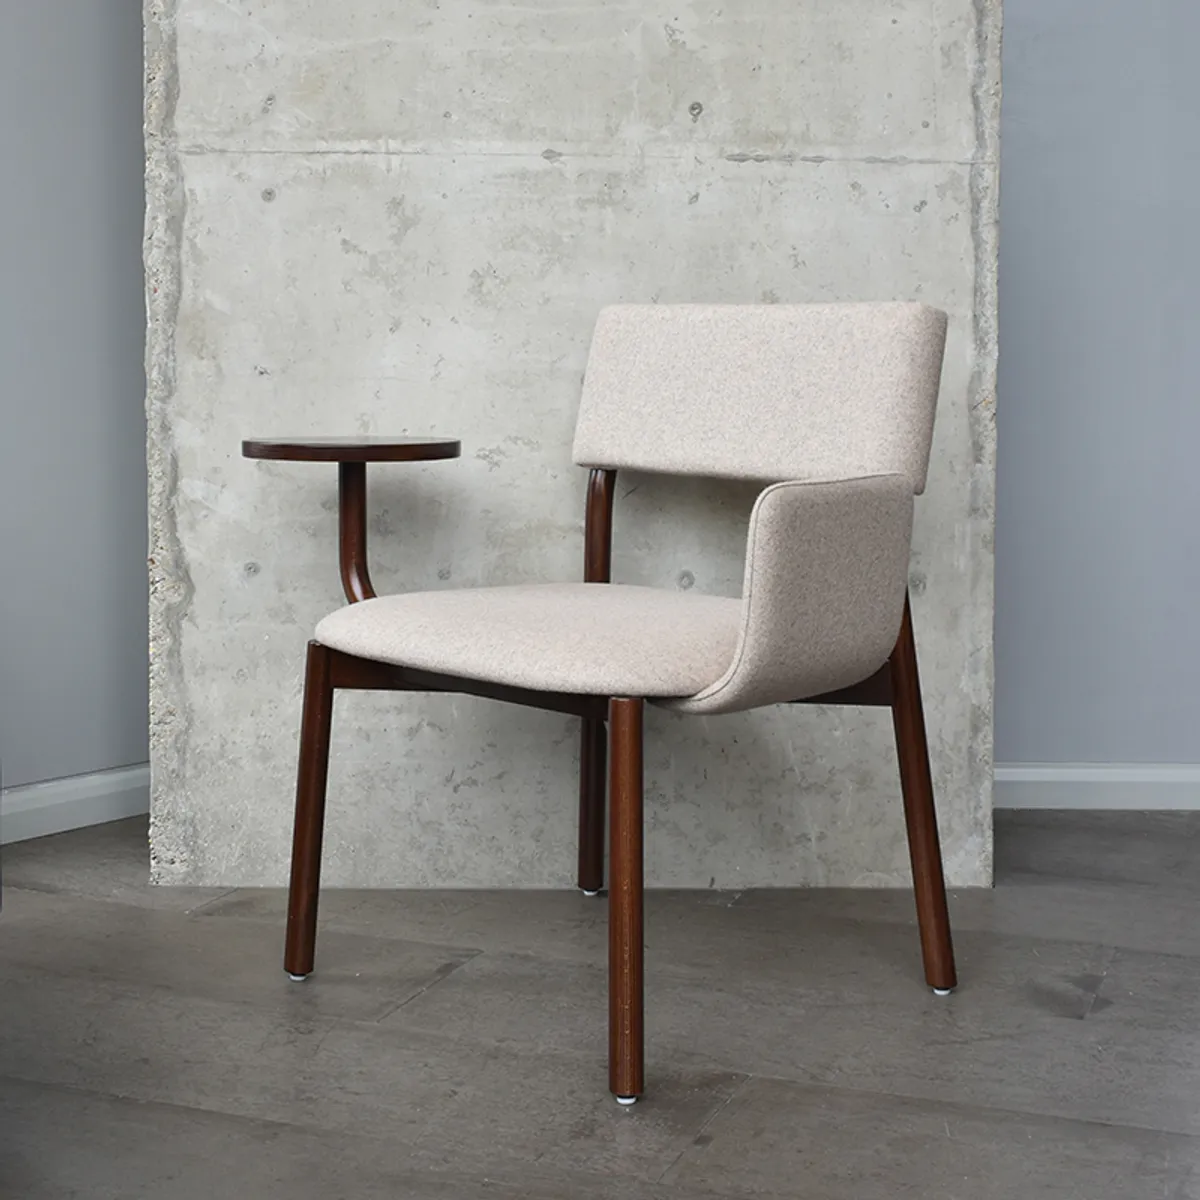 Scuelle Chair New Furniture From Milan 2019 By Inside Out Contracts 040